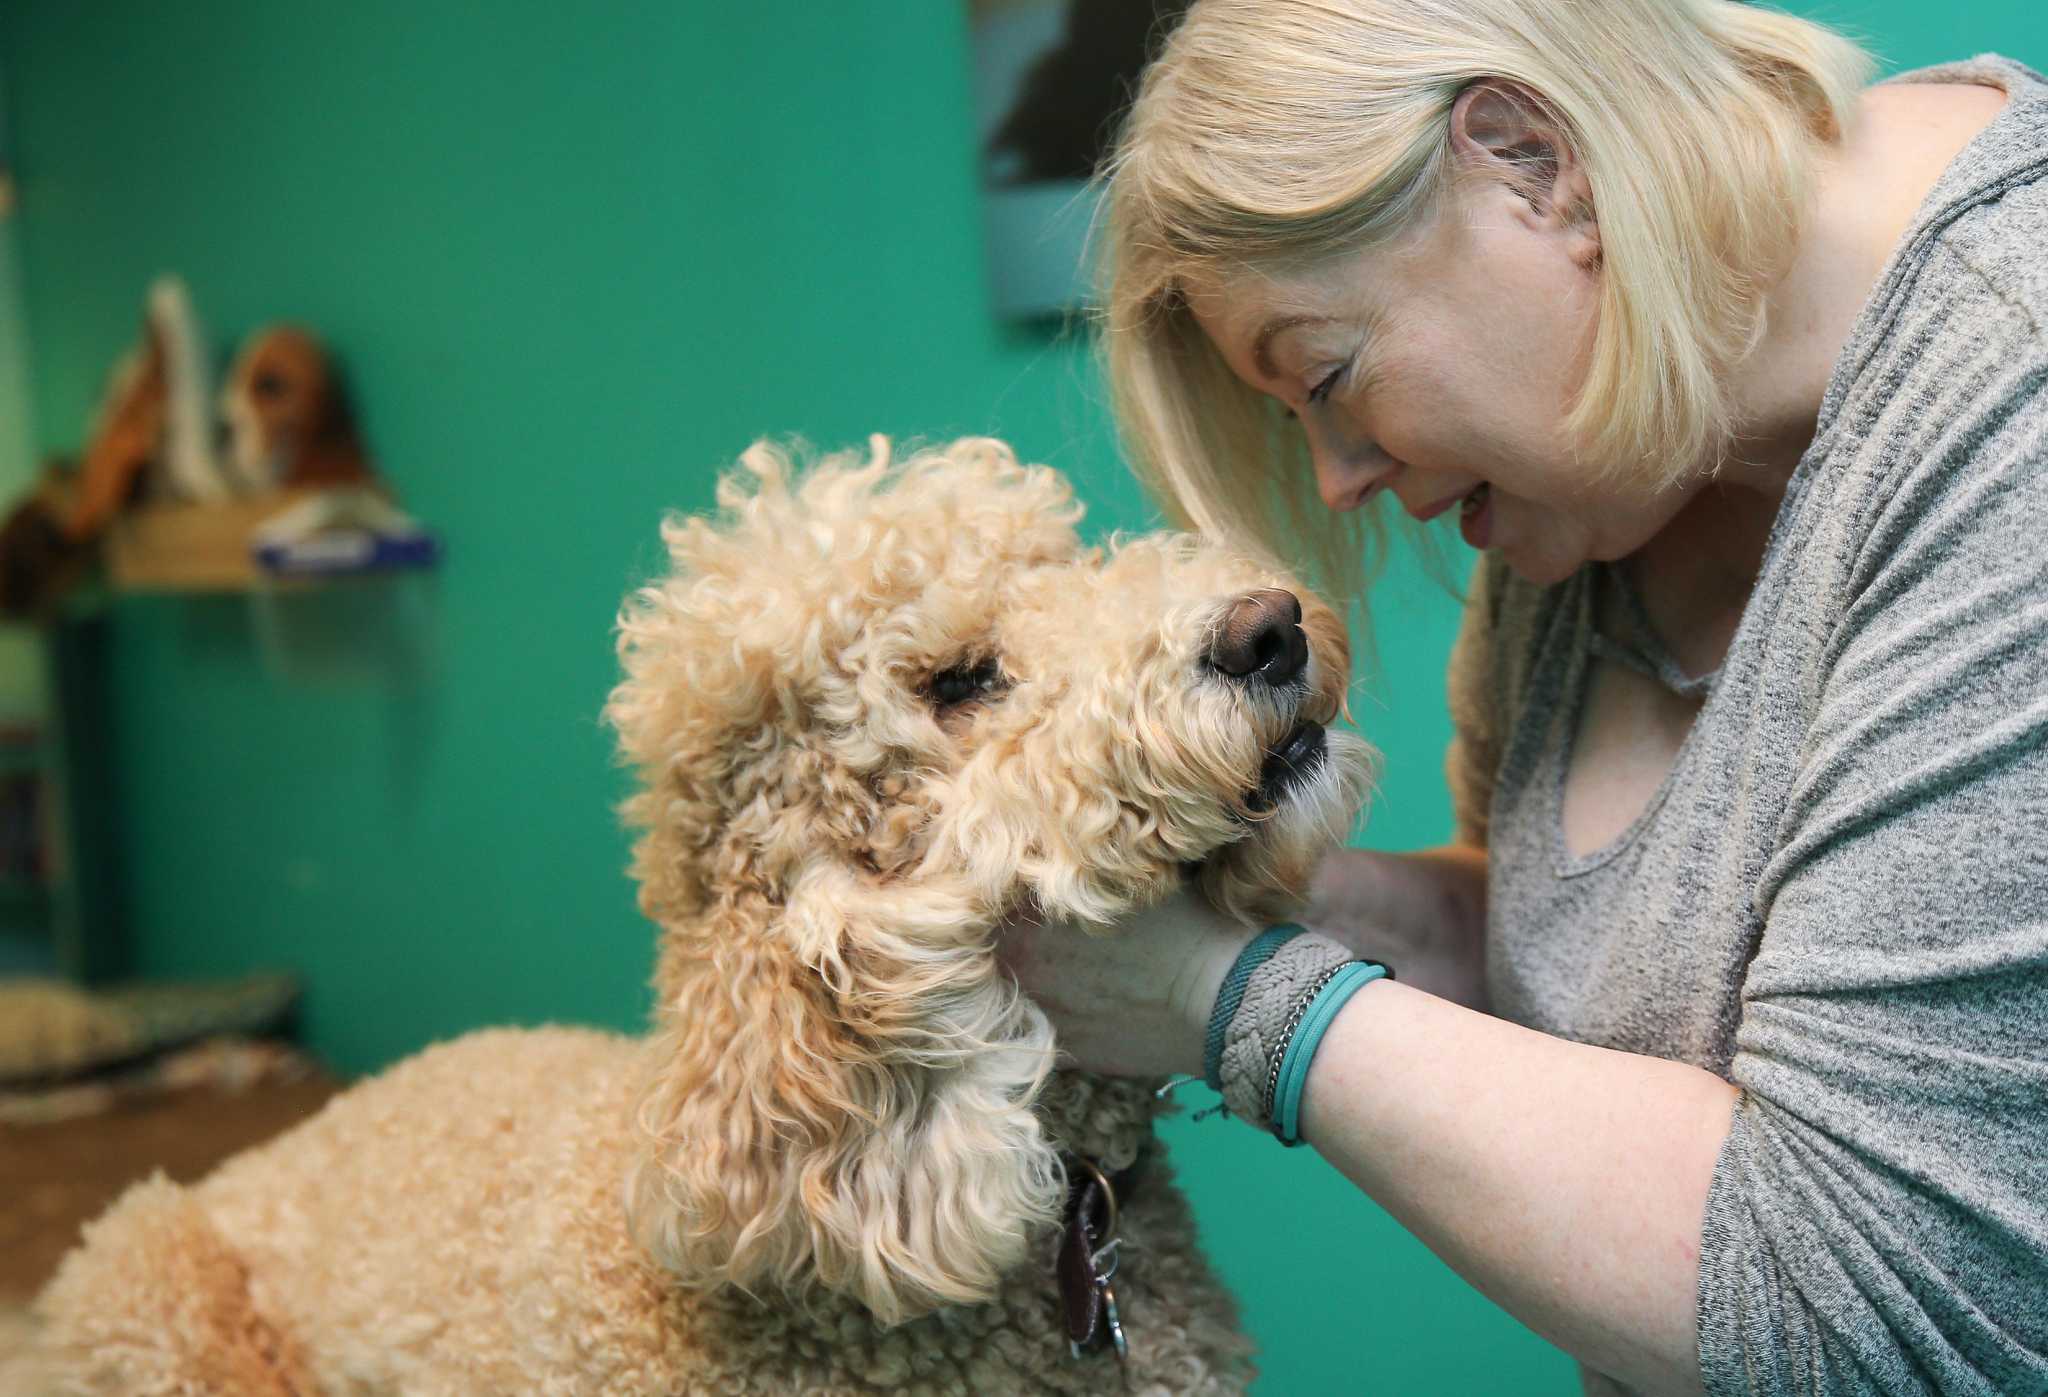 How Houston woman is calming pandemic anxiety in dogs through massage